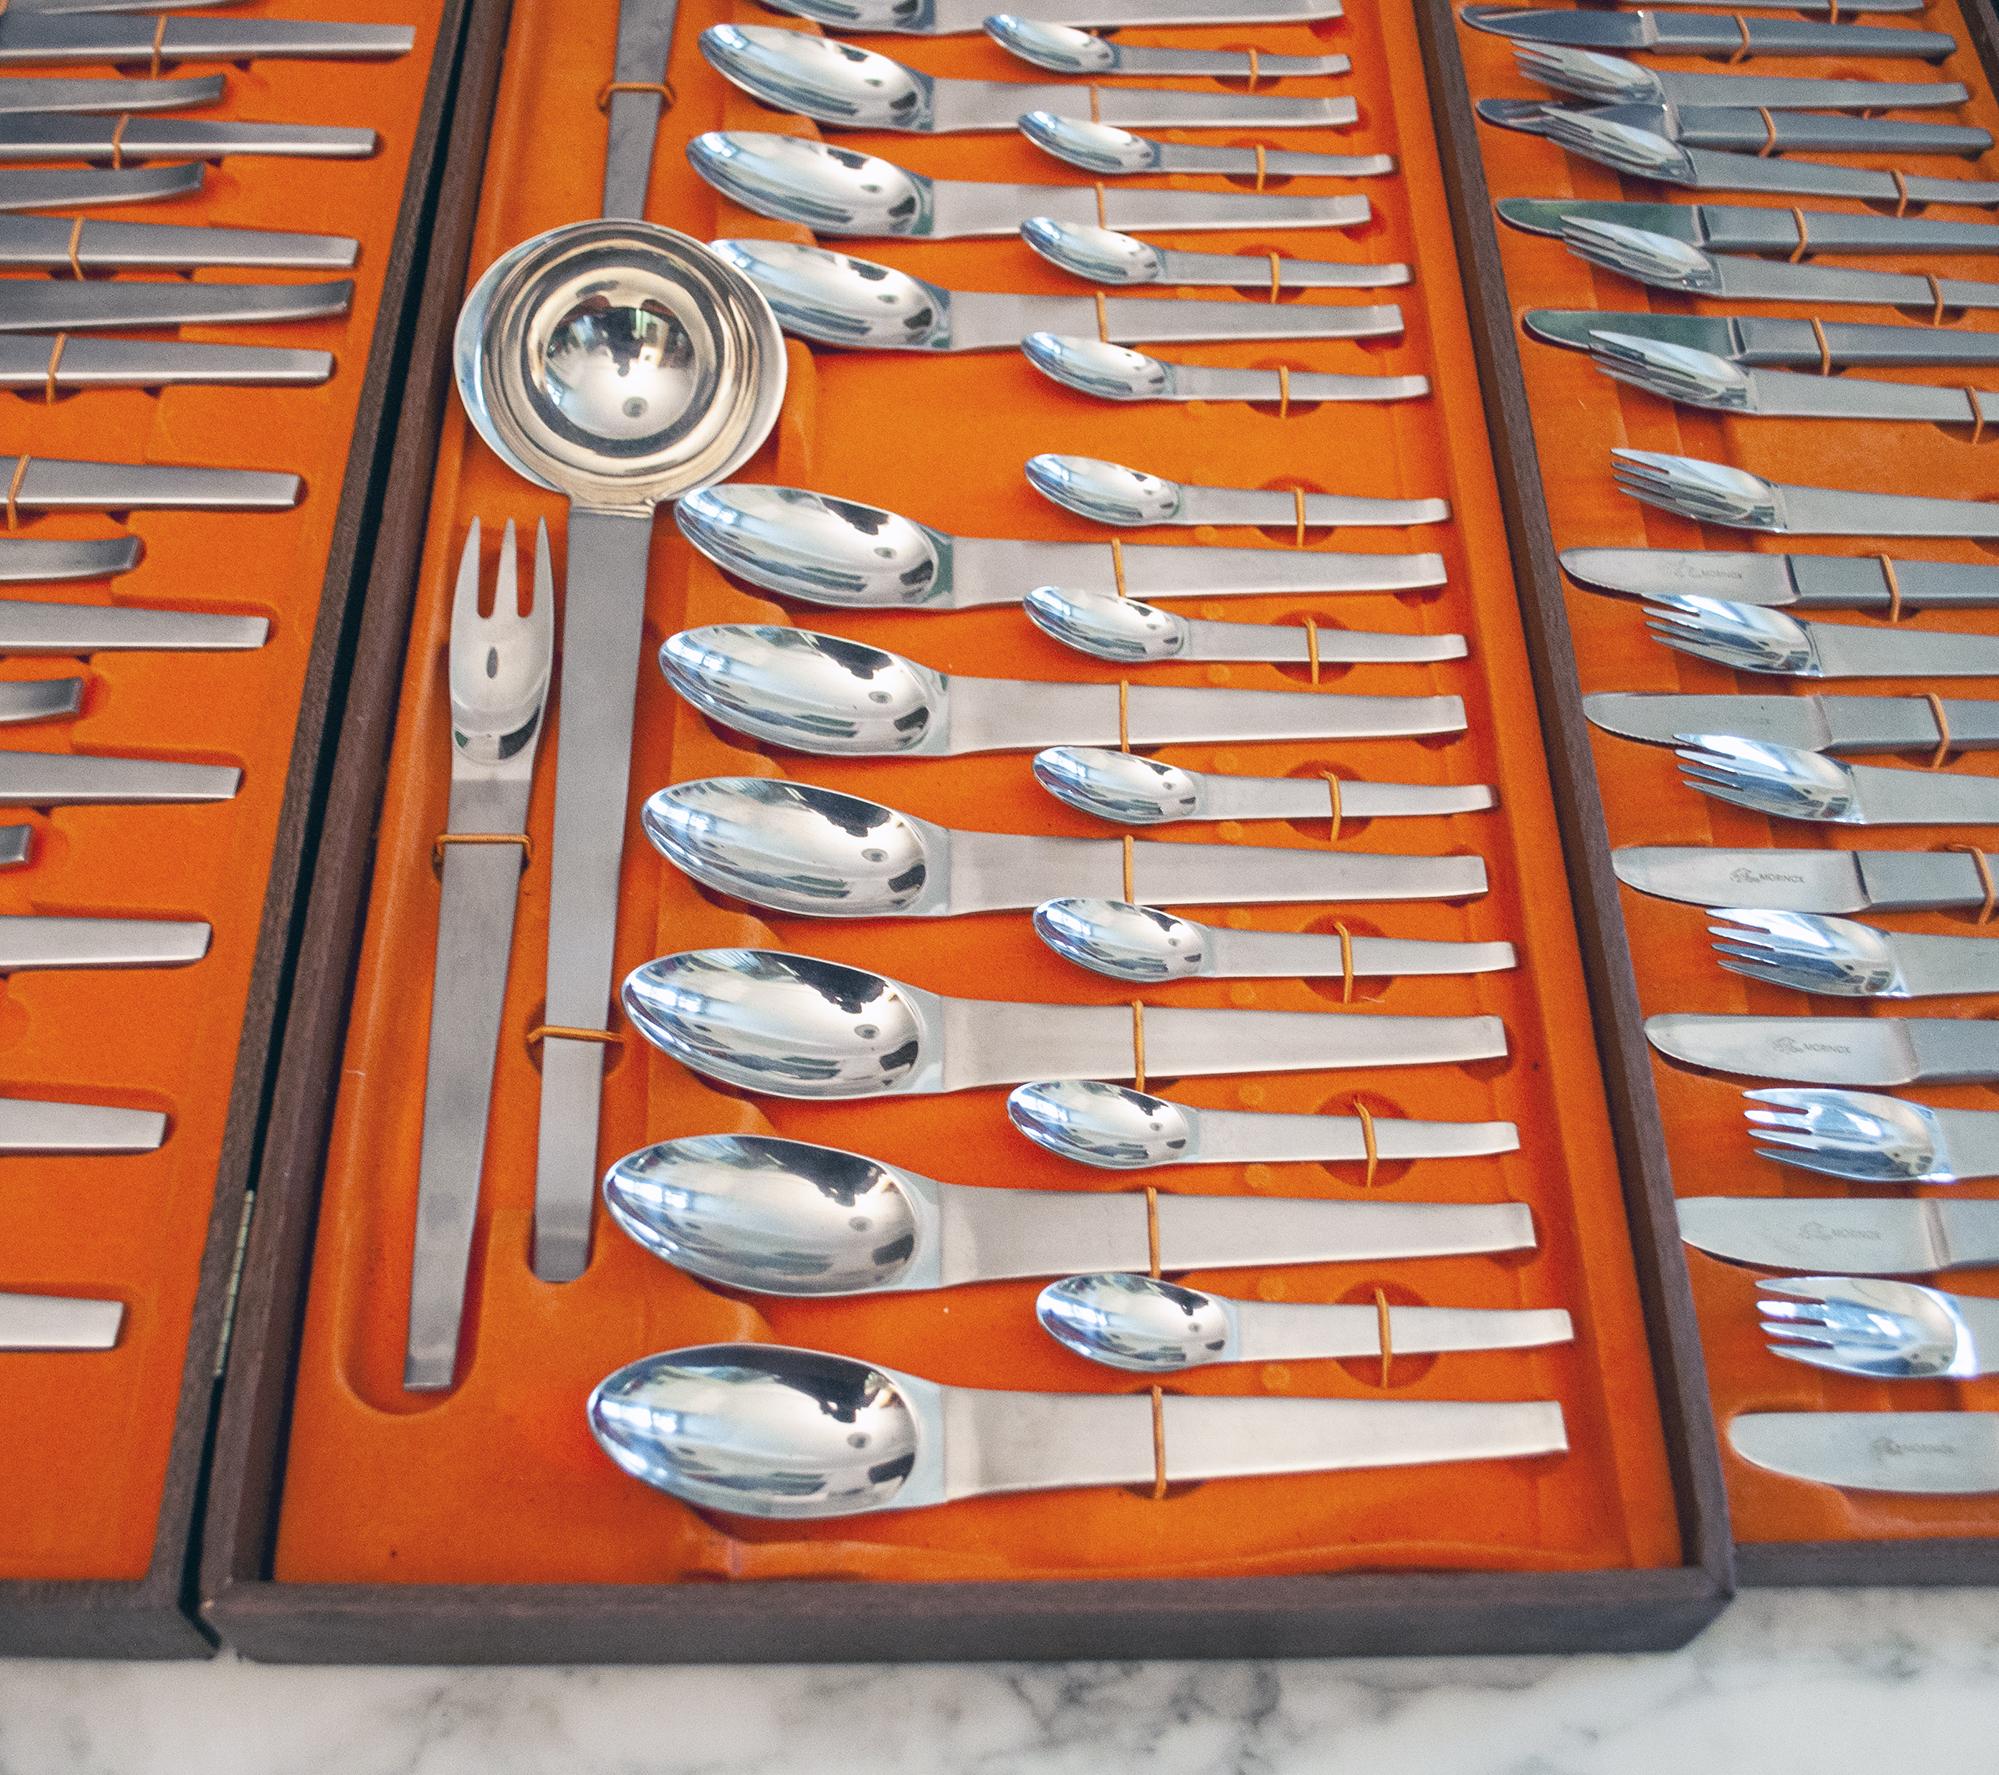 Mid-Century Modern Stainless Steel Cutlery Set by Carl Aubock for Morinox, 1950s